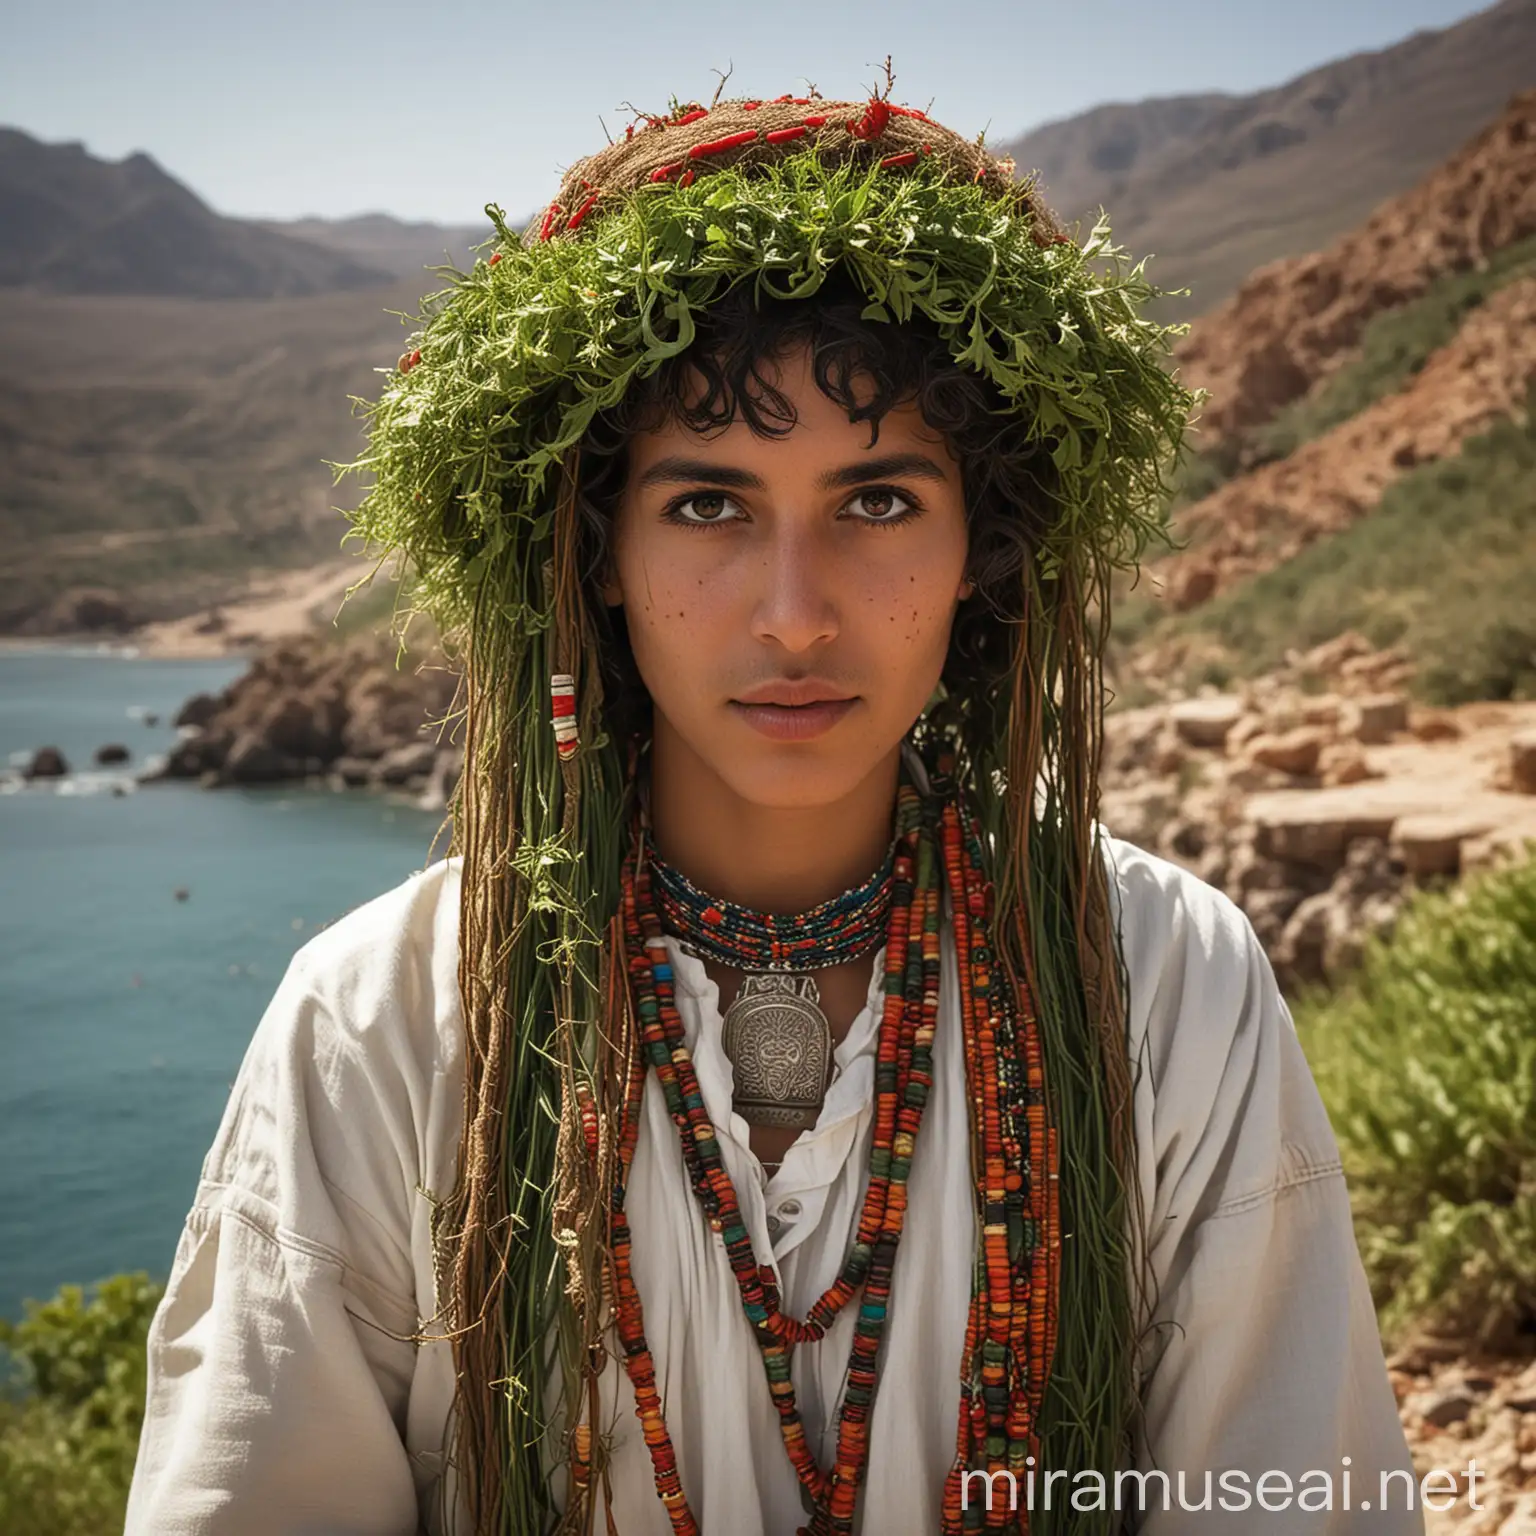  "Create an image portraying the Bekee, a fictional group characterized by stereotypical berber features, inhabiting a temperate island environment. Show them amidst seaside mountains and verdant landscapes. Emphasize their distinctive facial features, such as prominent noses while incorporating traditional attire or symbolic items that reflect their cultural identity within this unique setting."